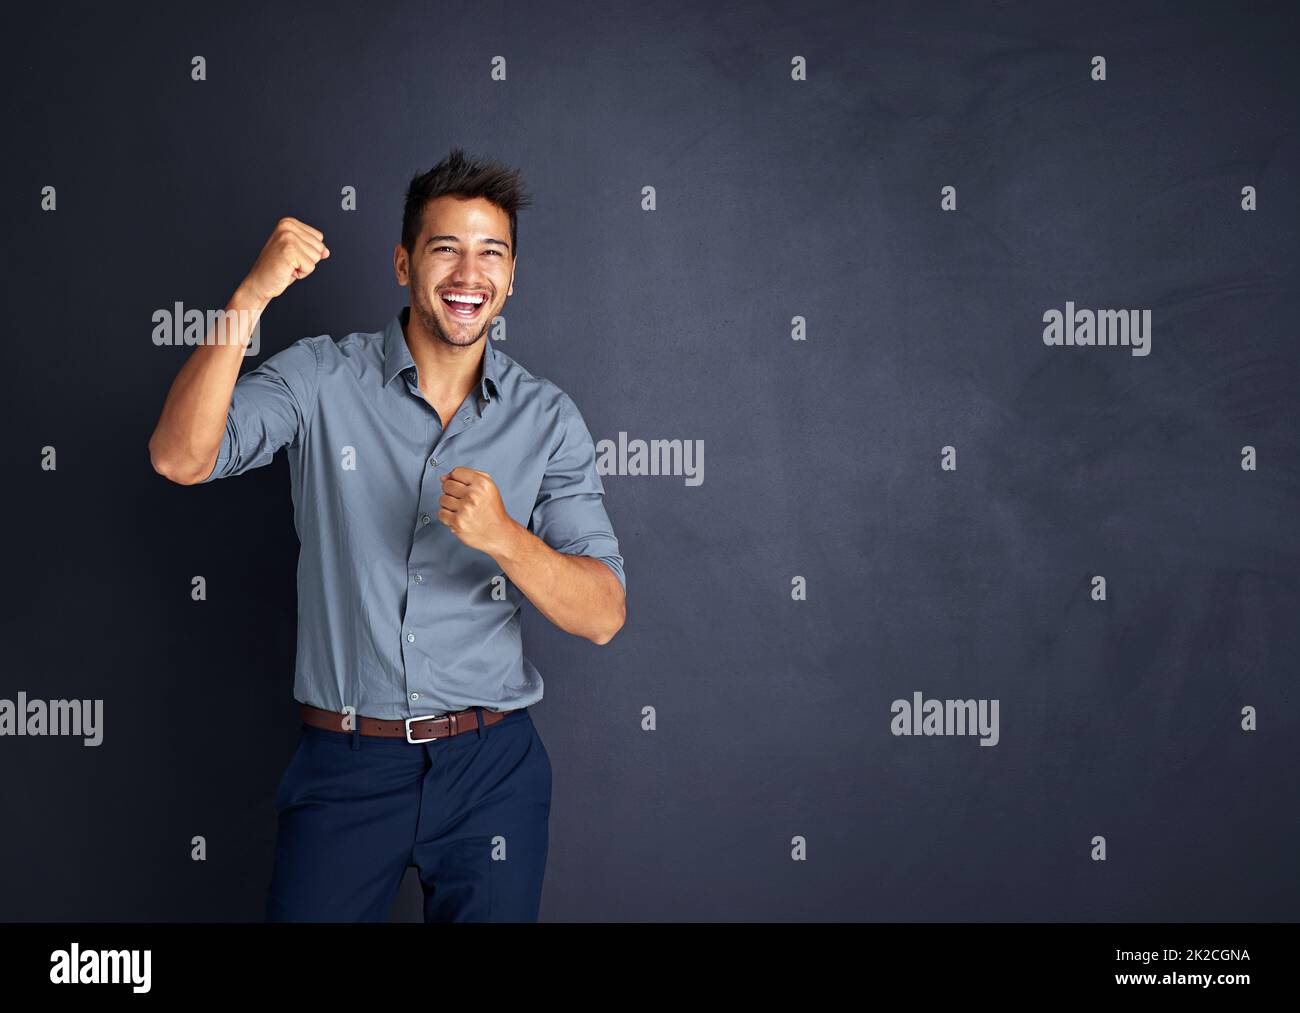 Cheering on through all his achievements. Studio shot of a young businessman standing with his fists raised in celebration against a dark background. Stock Photo